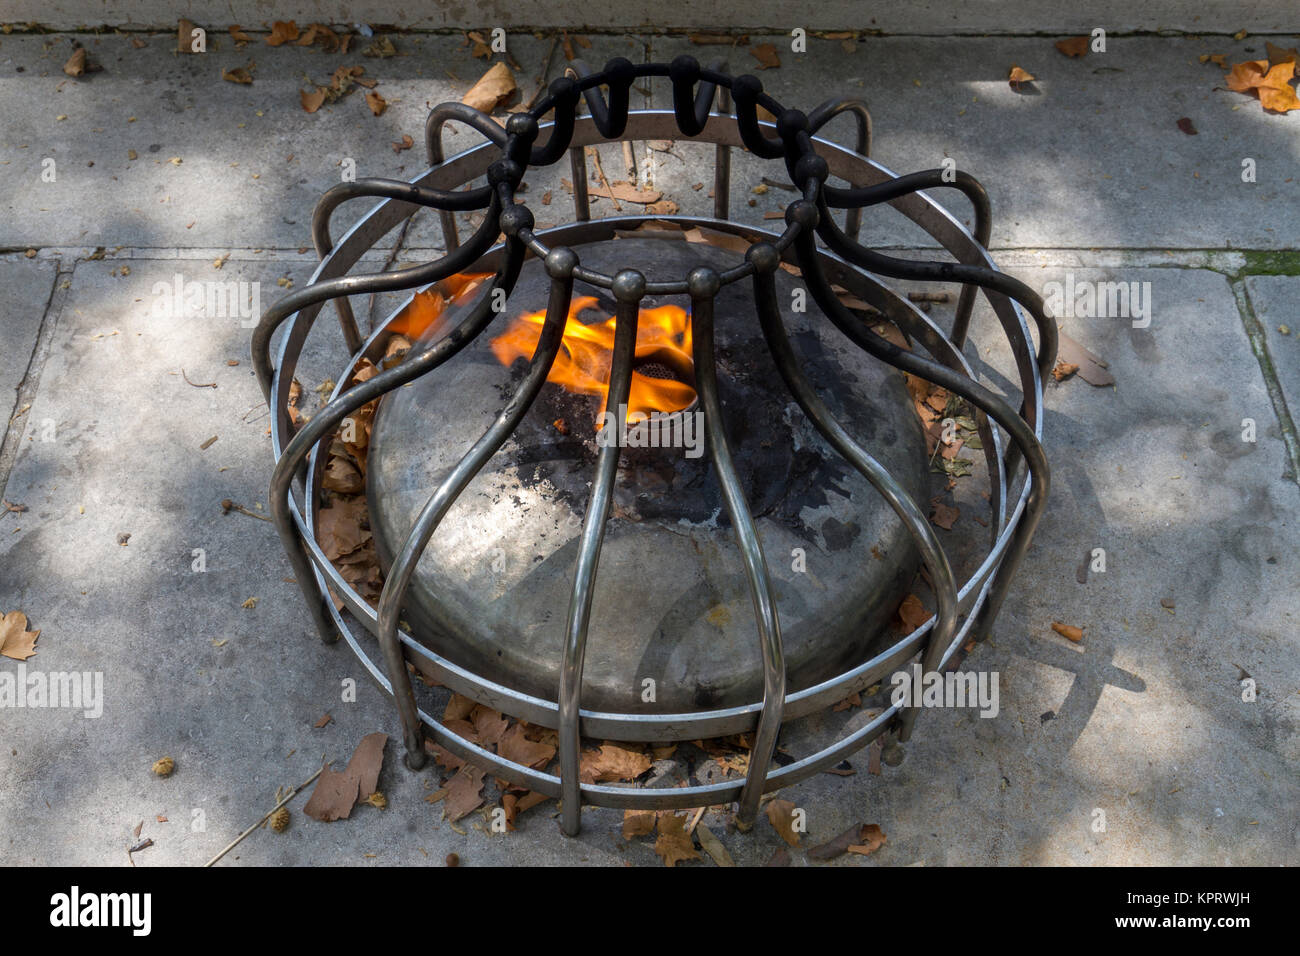 The Eternal Flame in the Tomb of the Unknown Revolutionary War Soldier, Washington Square, Philadelphia, Pennsylvania, USA. Stock Photo